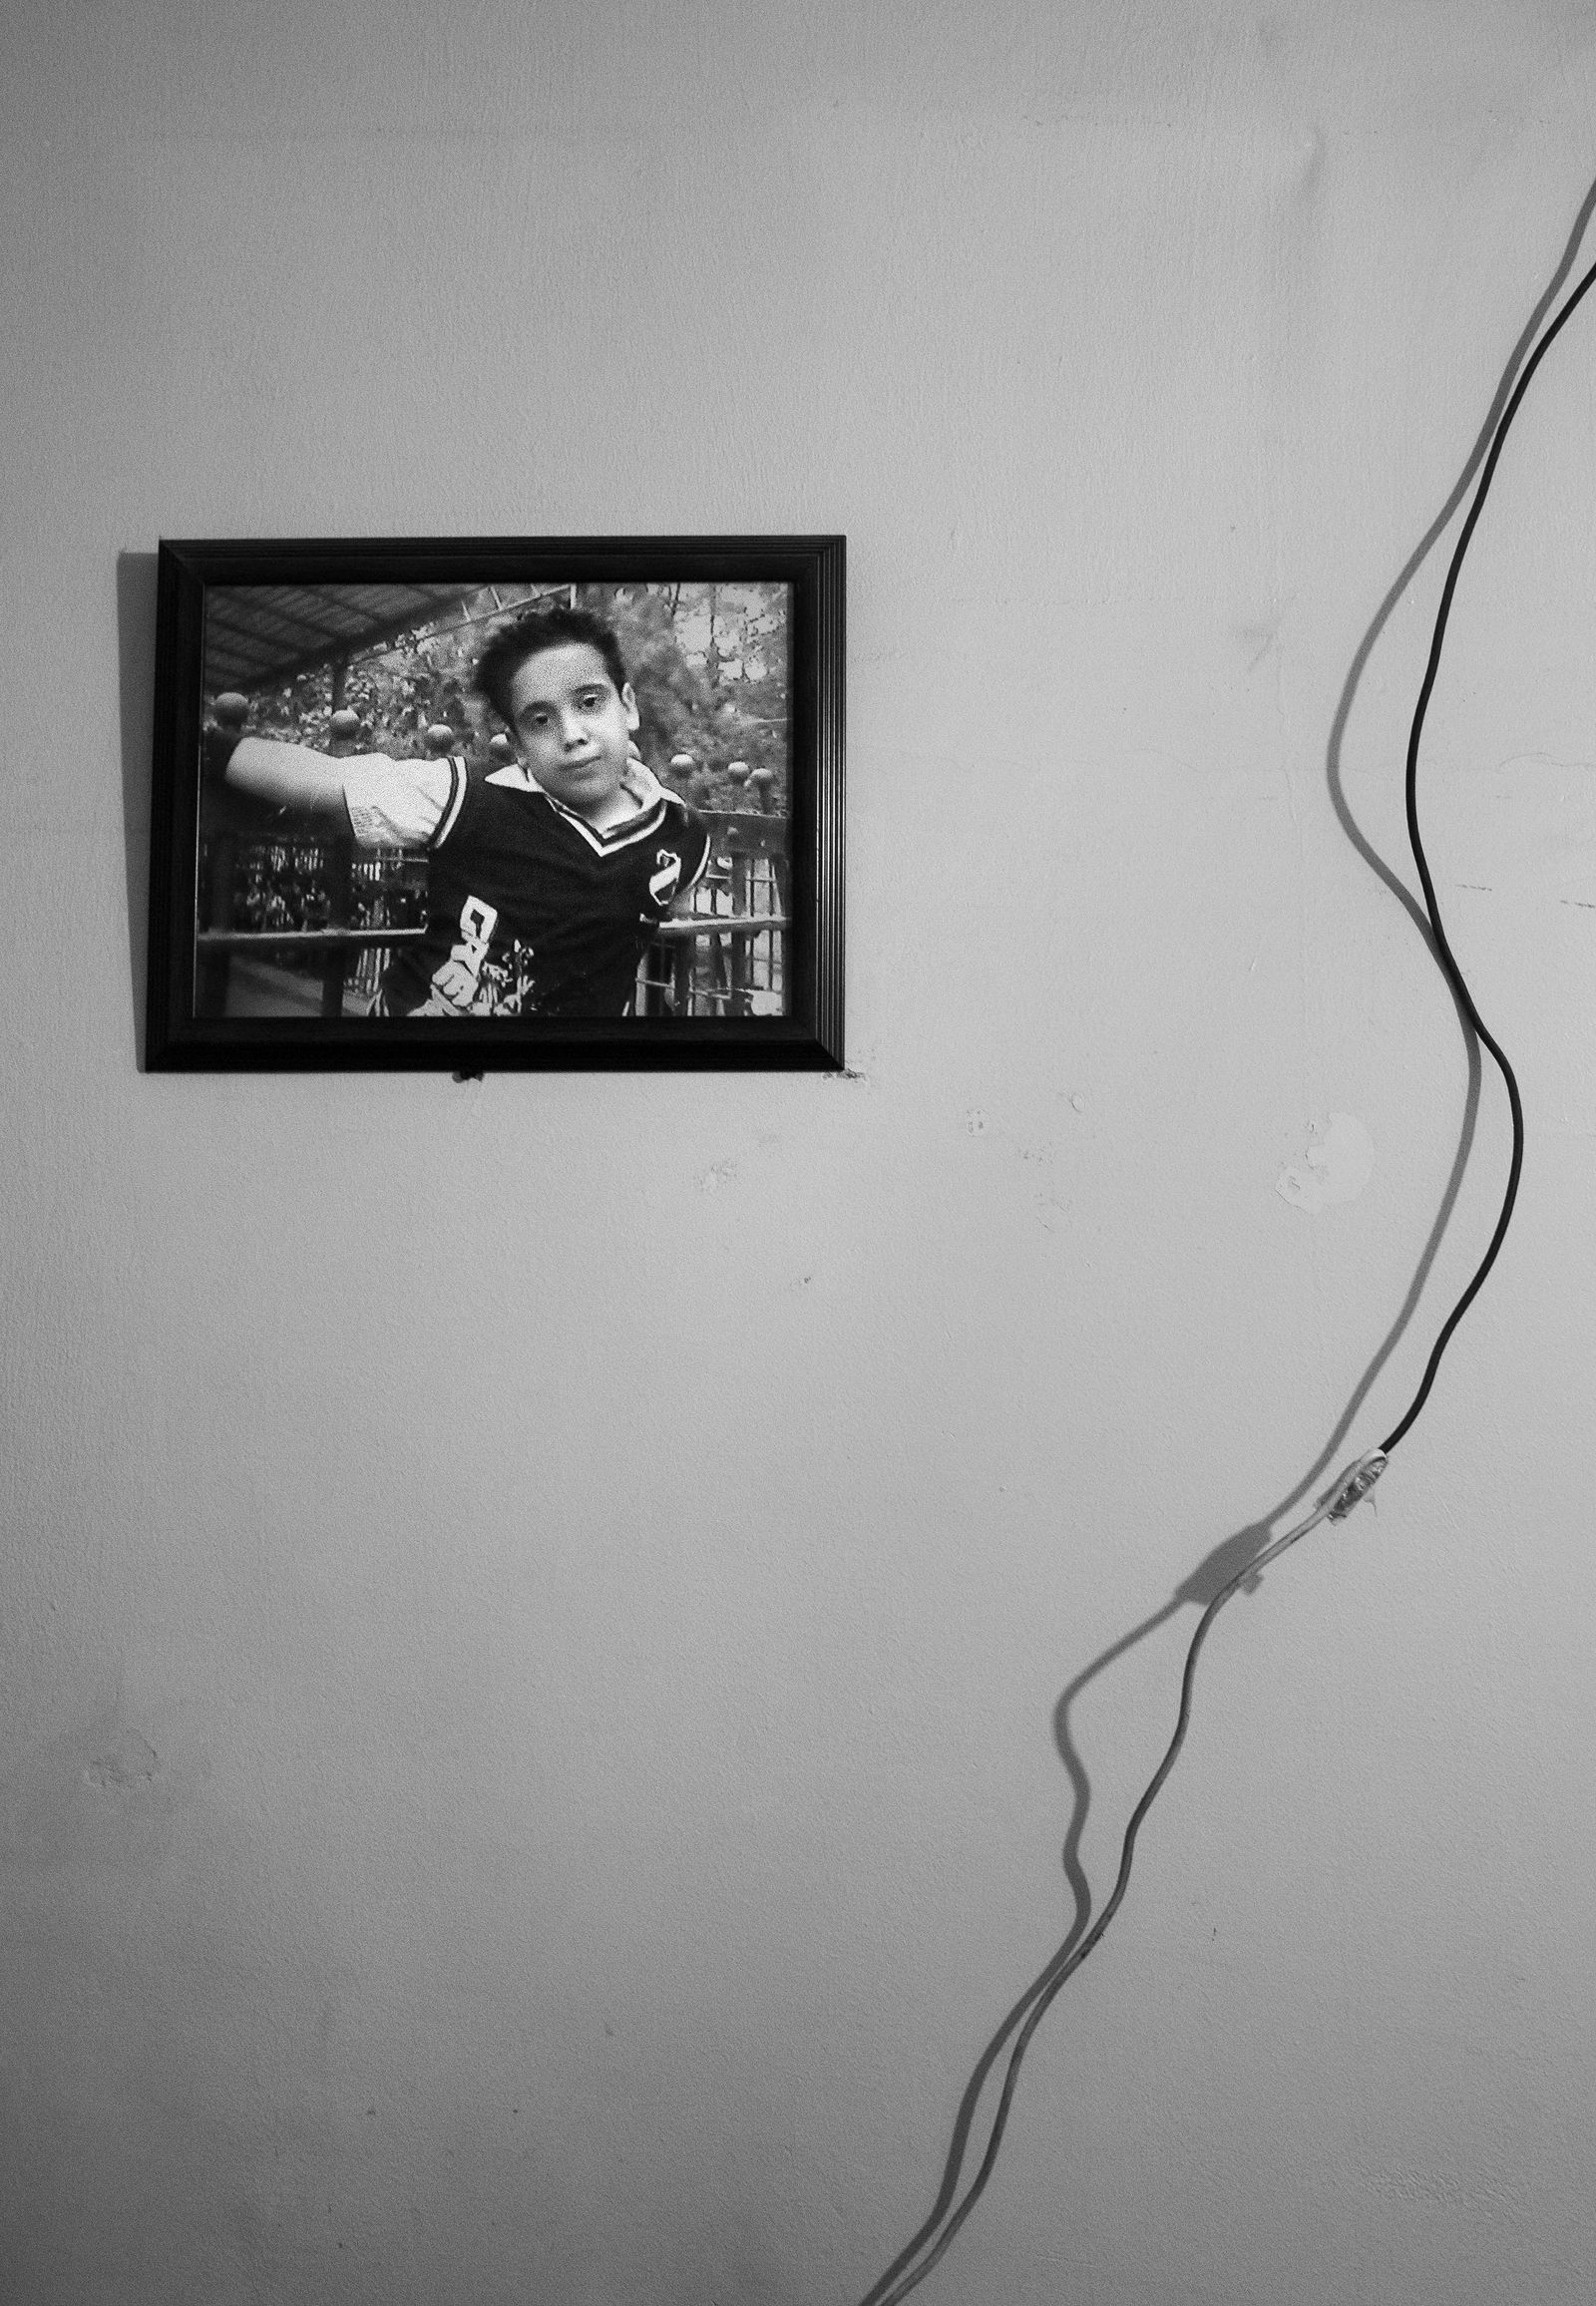 © Lamees Saleh Sharaf Eldin - A picture of Ahmed Jamal , Ten years old, hangs in front of his mother's bed.